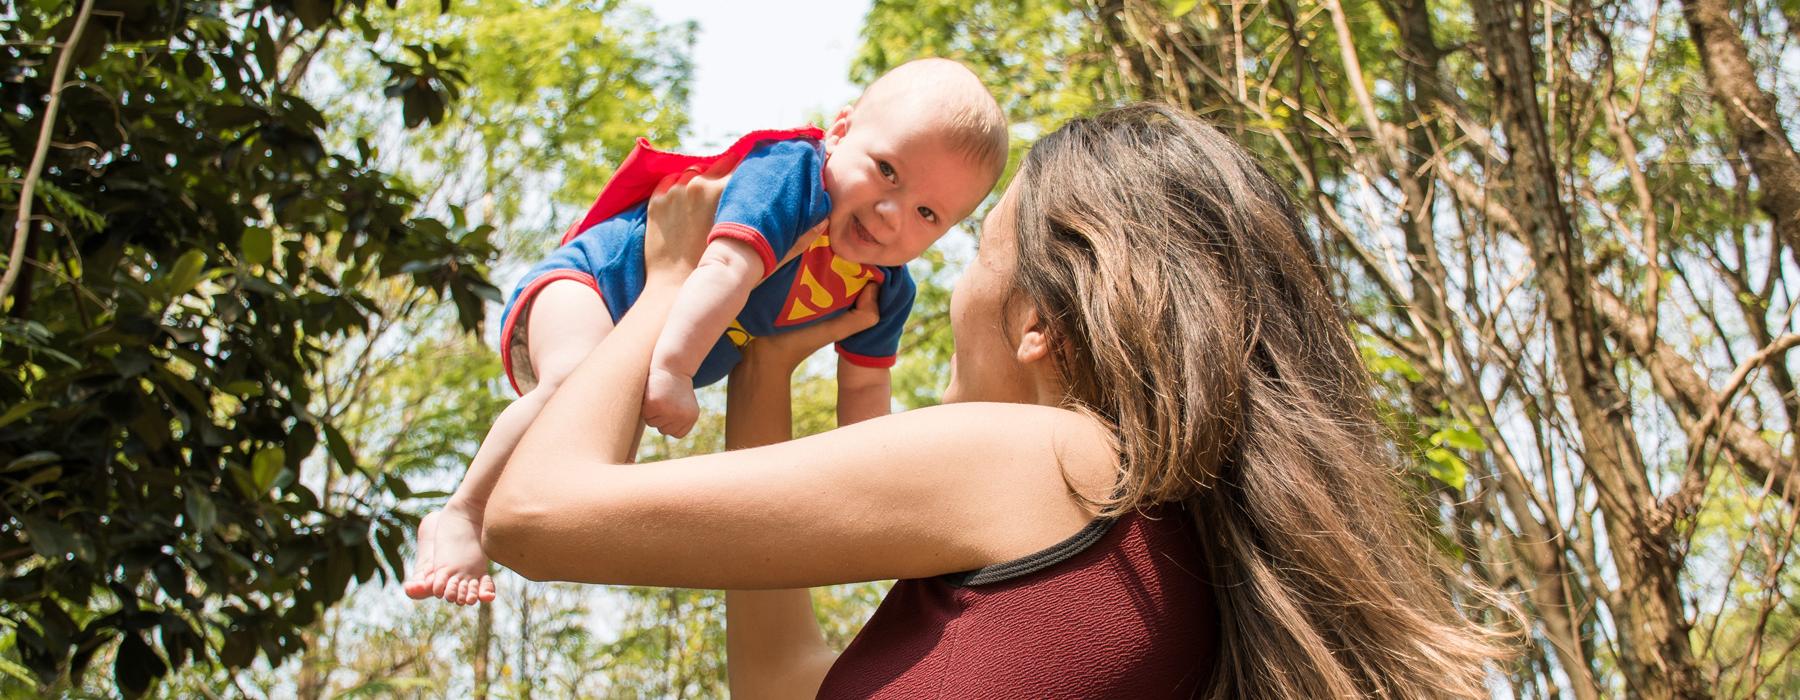 Woman Lifting  In The Air Baby Wearing A Super Man Costume